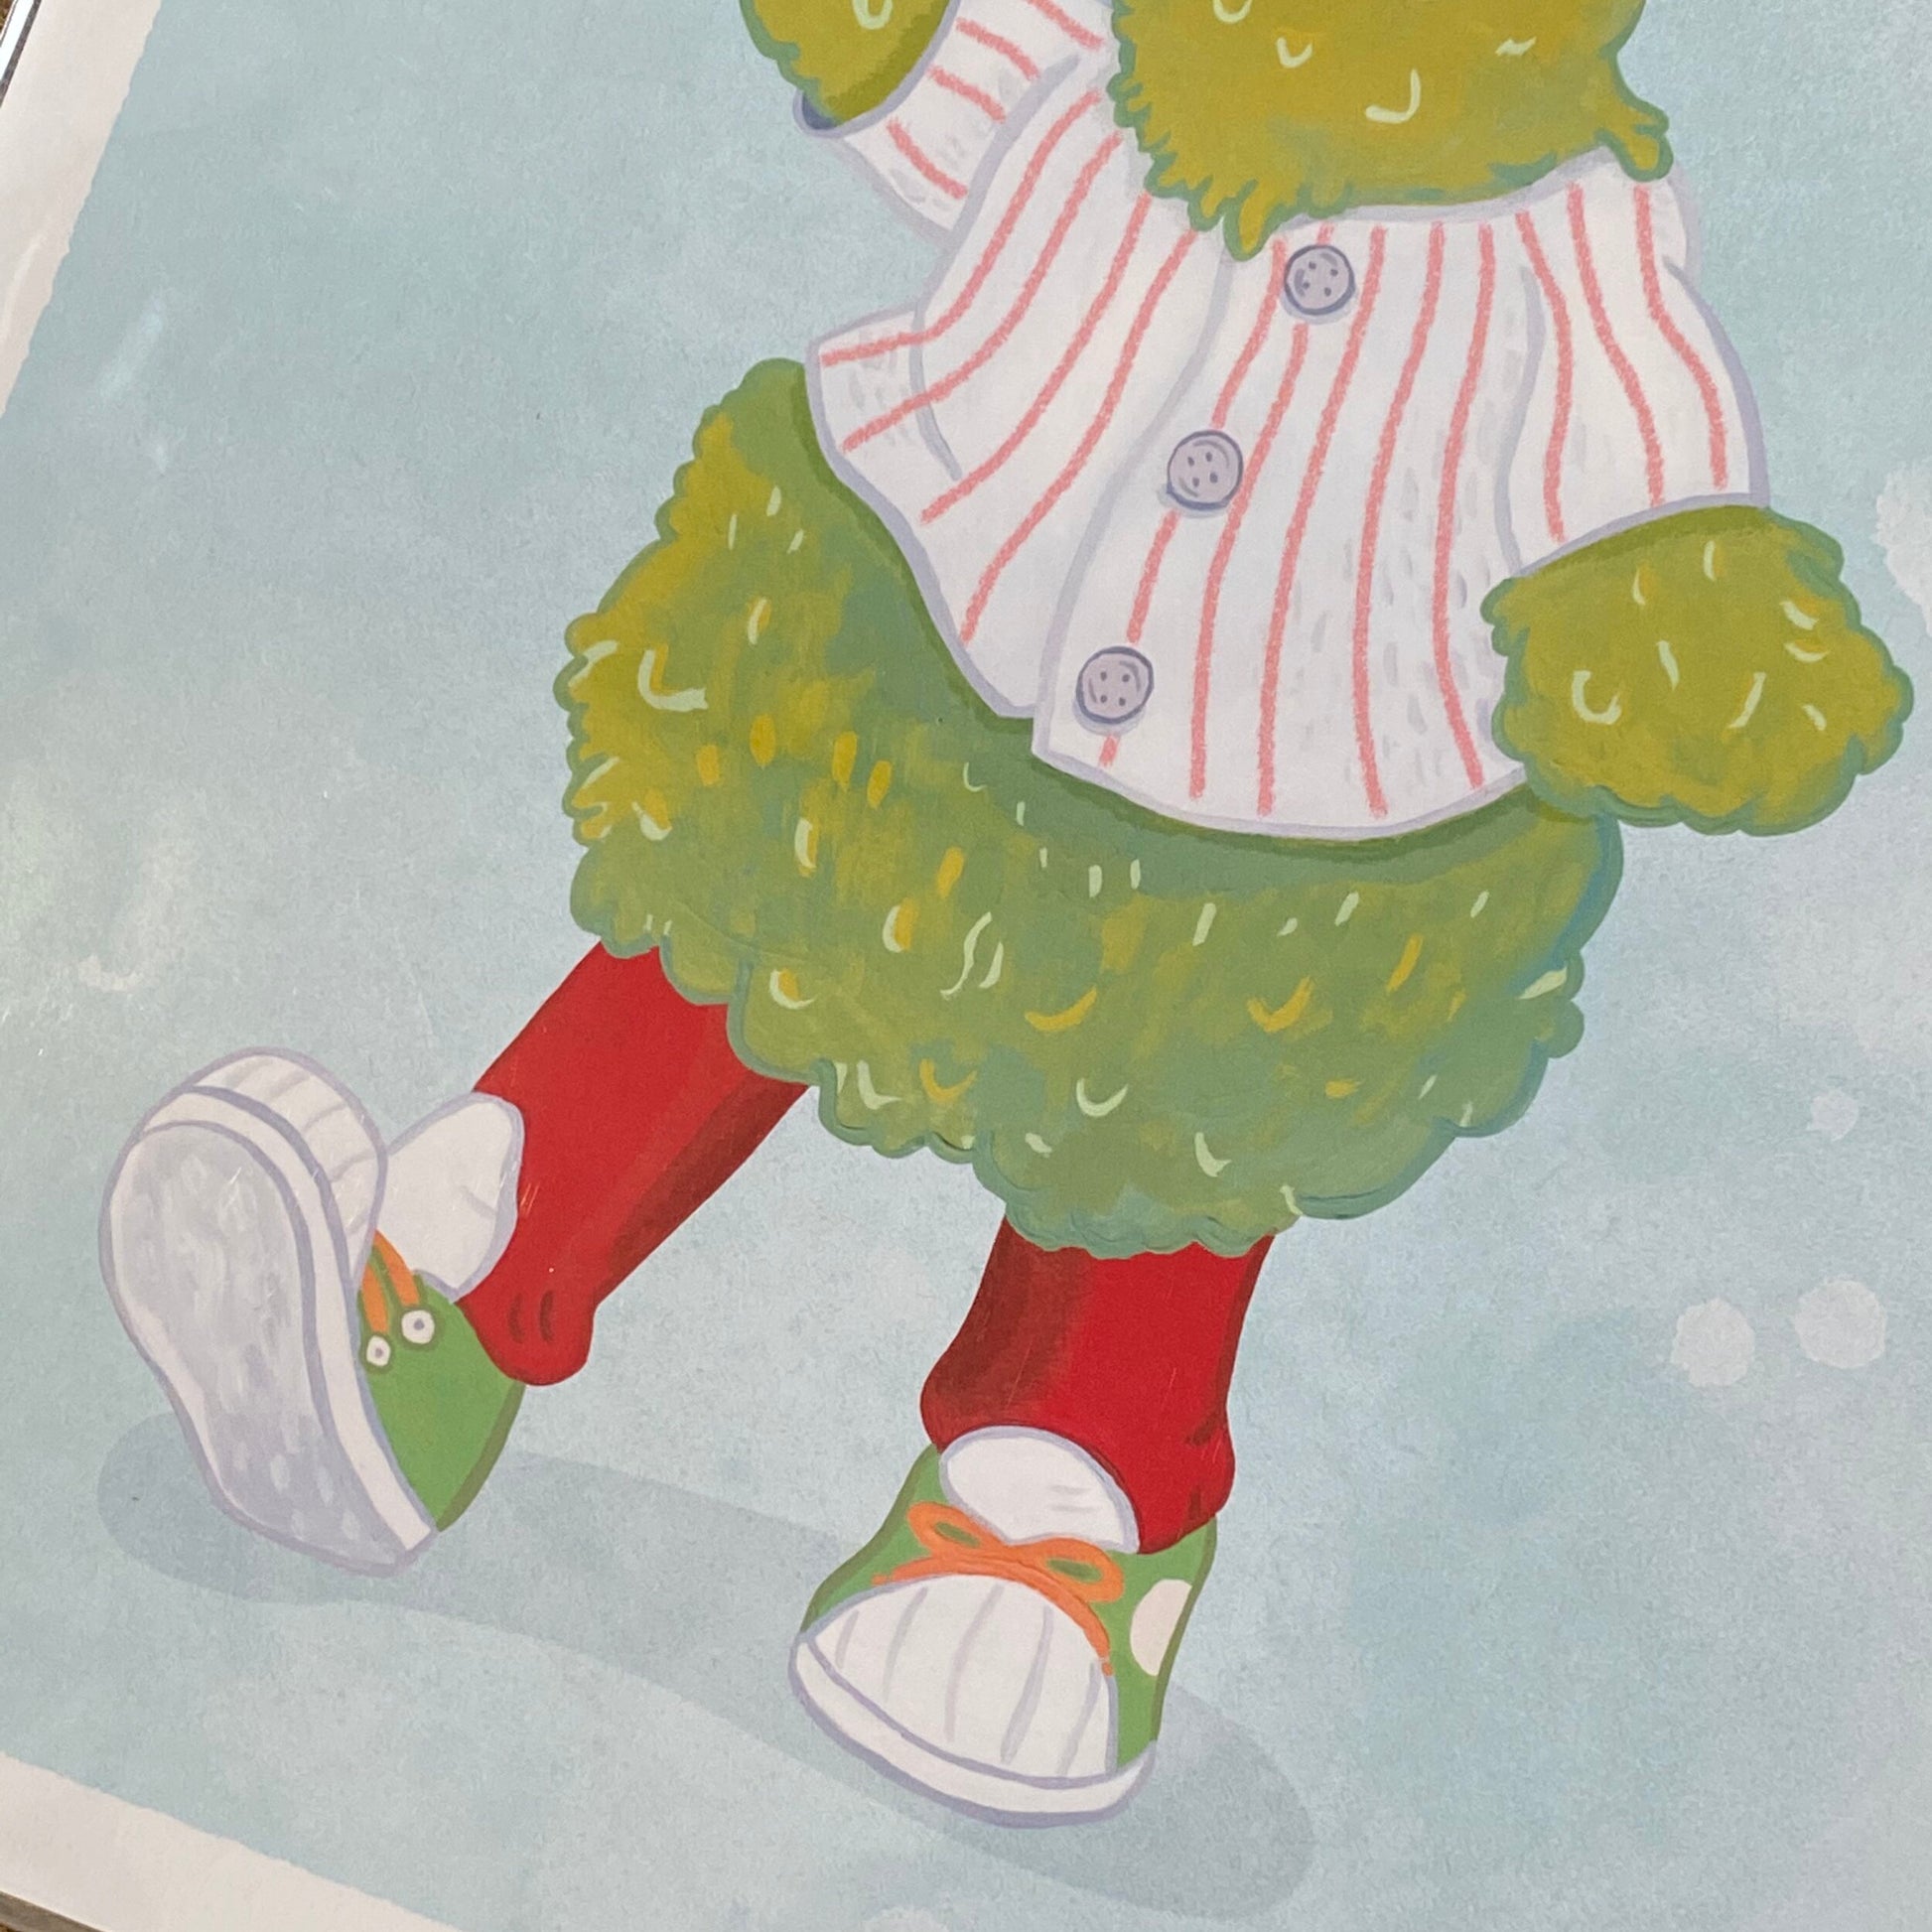 Illustration of cartoon legs wearing red socks and green and white sneakers, paired with a gritty Philly Mascot Prints outfit by Jamie Bendas.